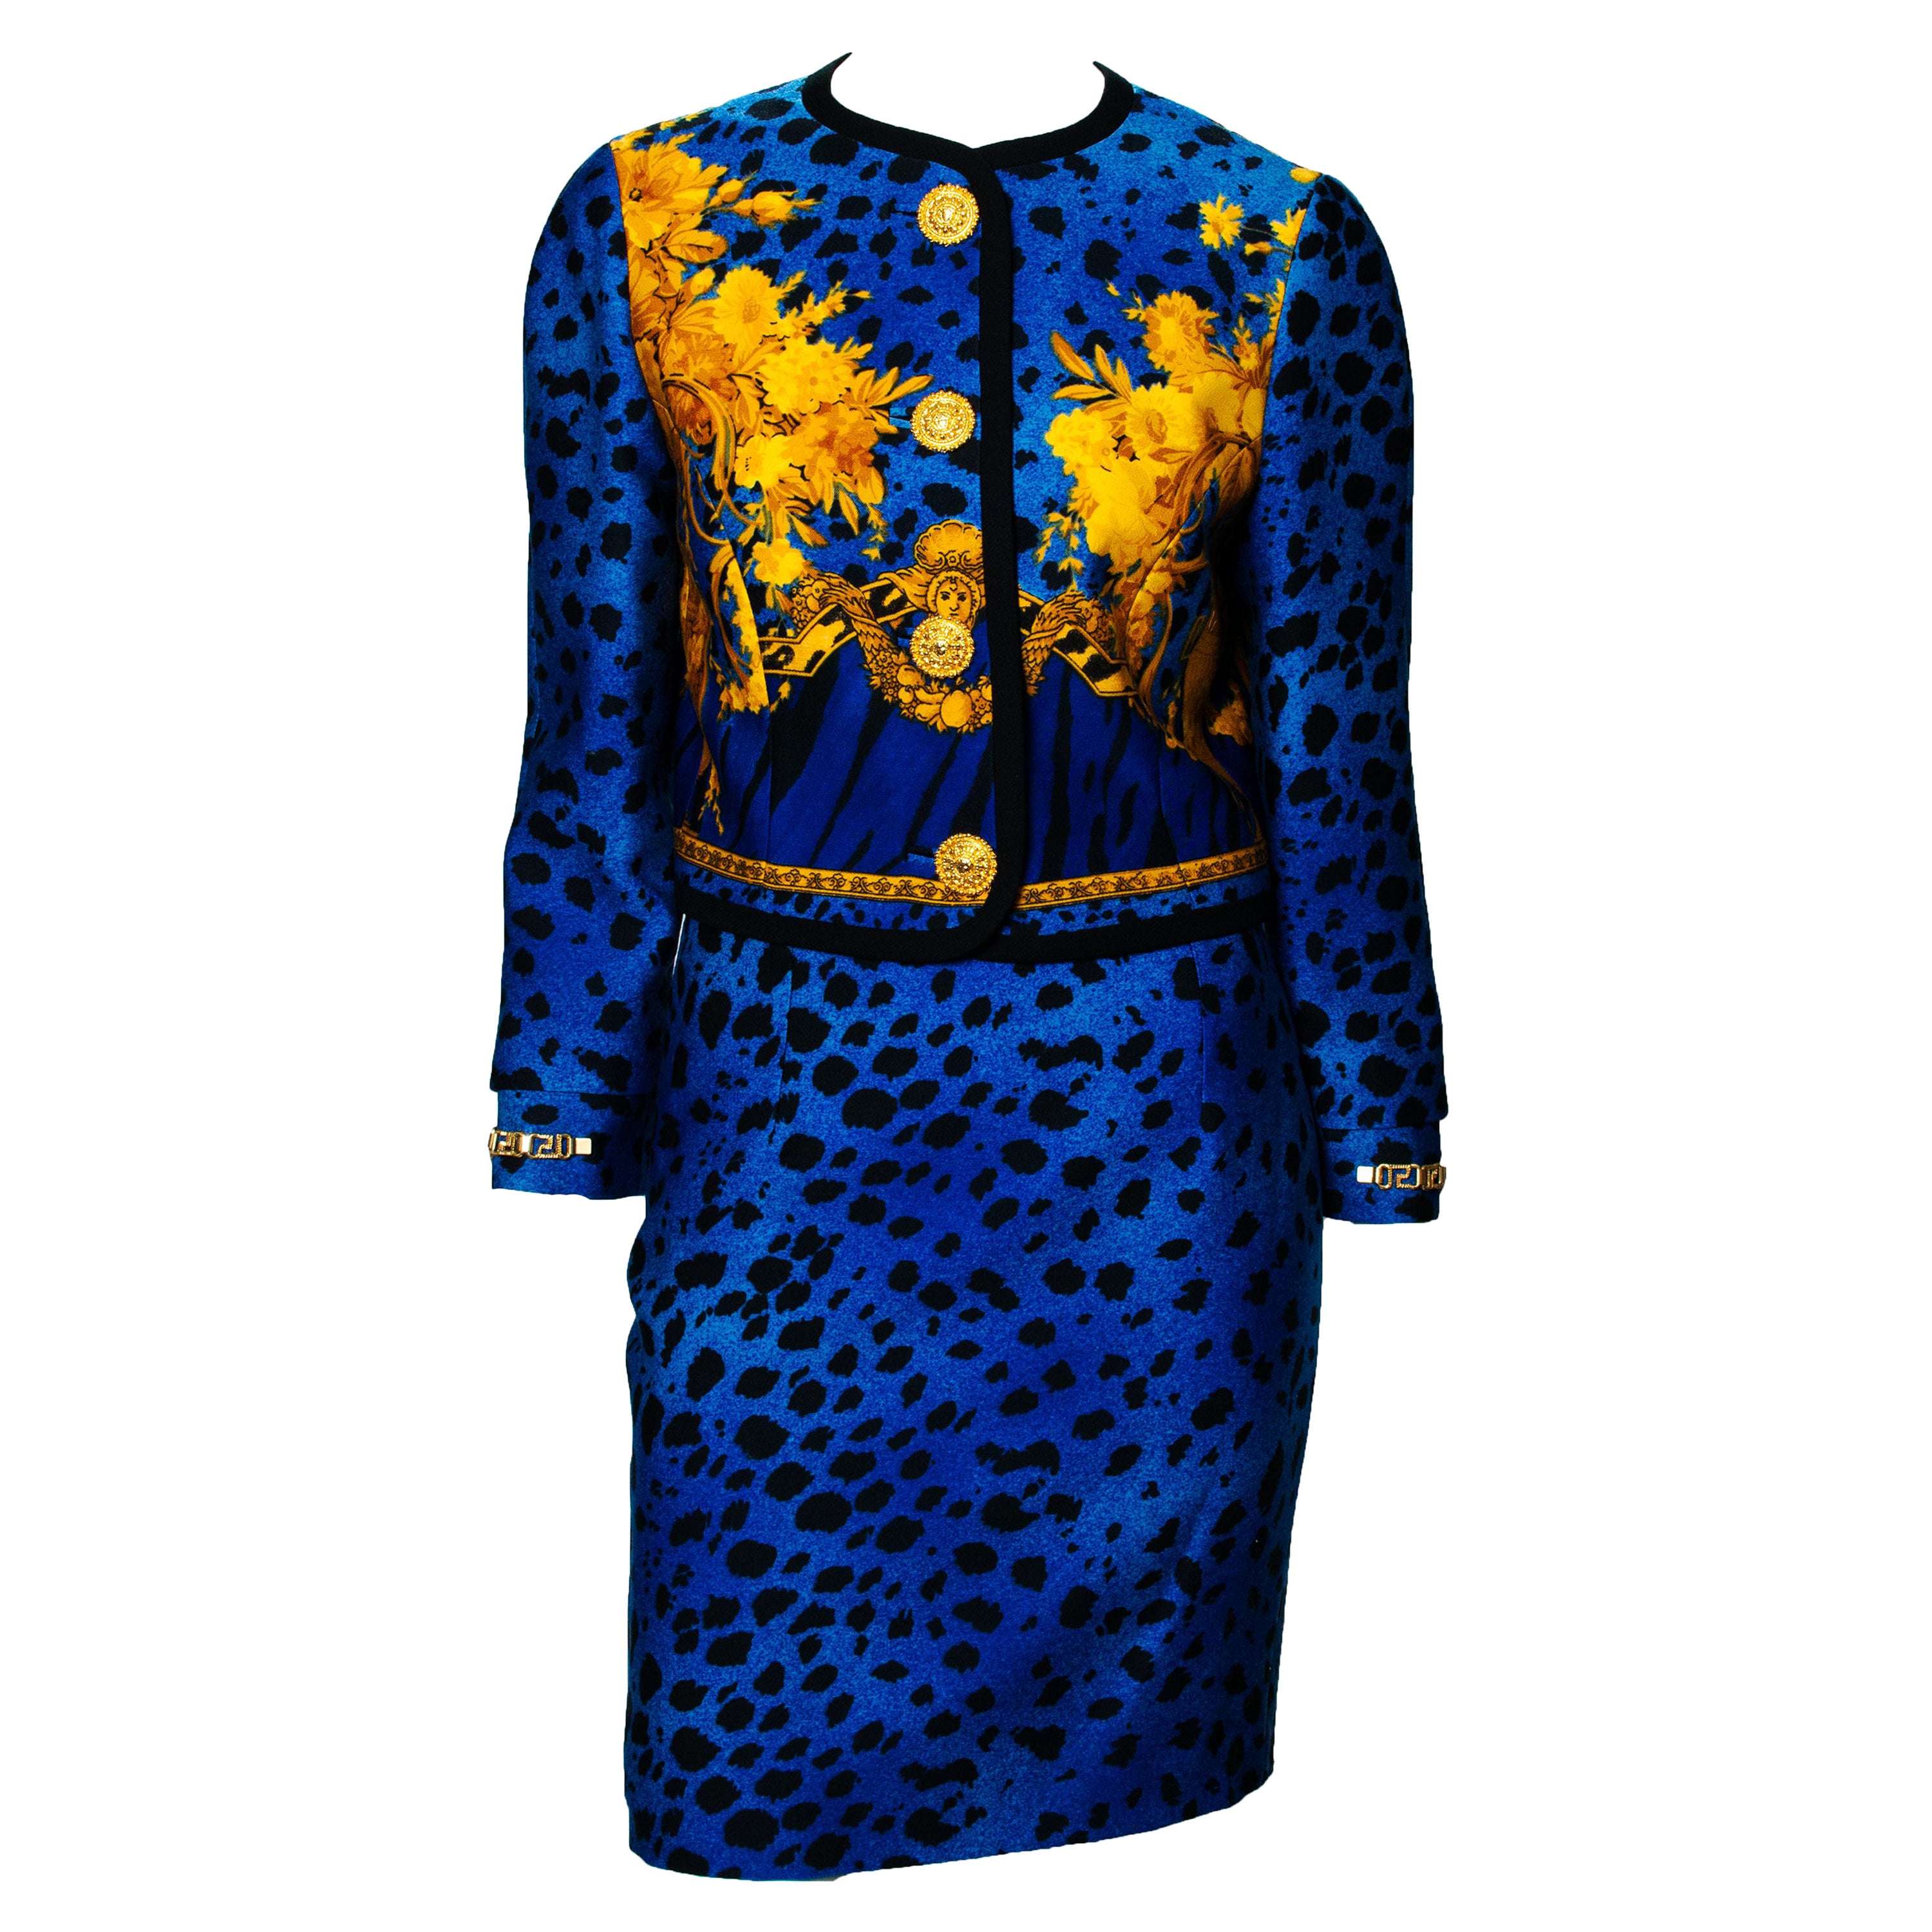 1992 Gianni Versace Blue Baroque Leopard Print Skirt Suit with Gold Chain Cuffs For Sale